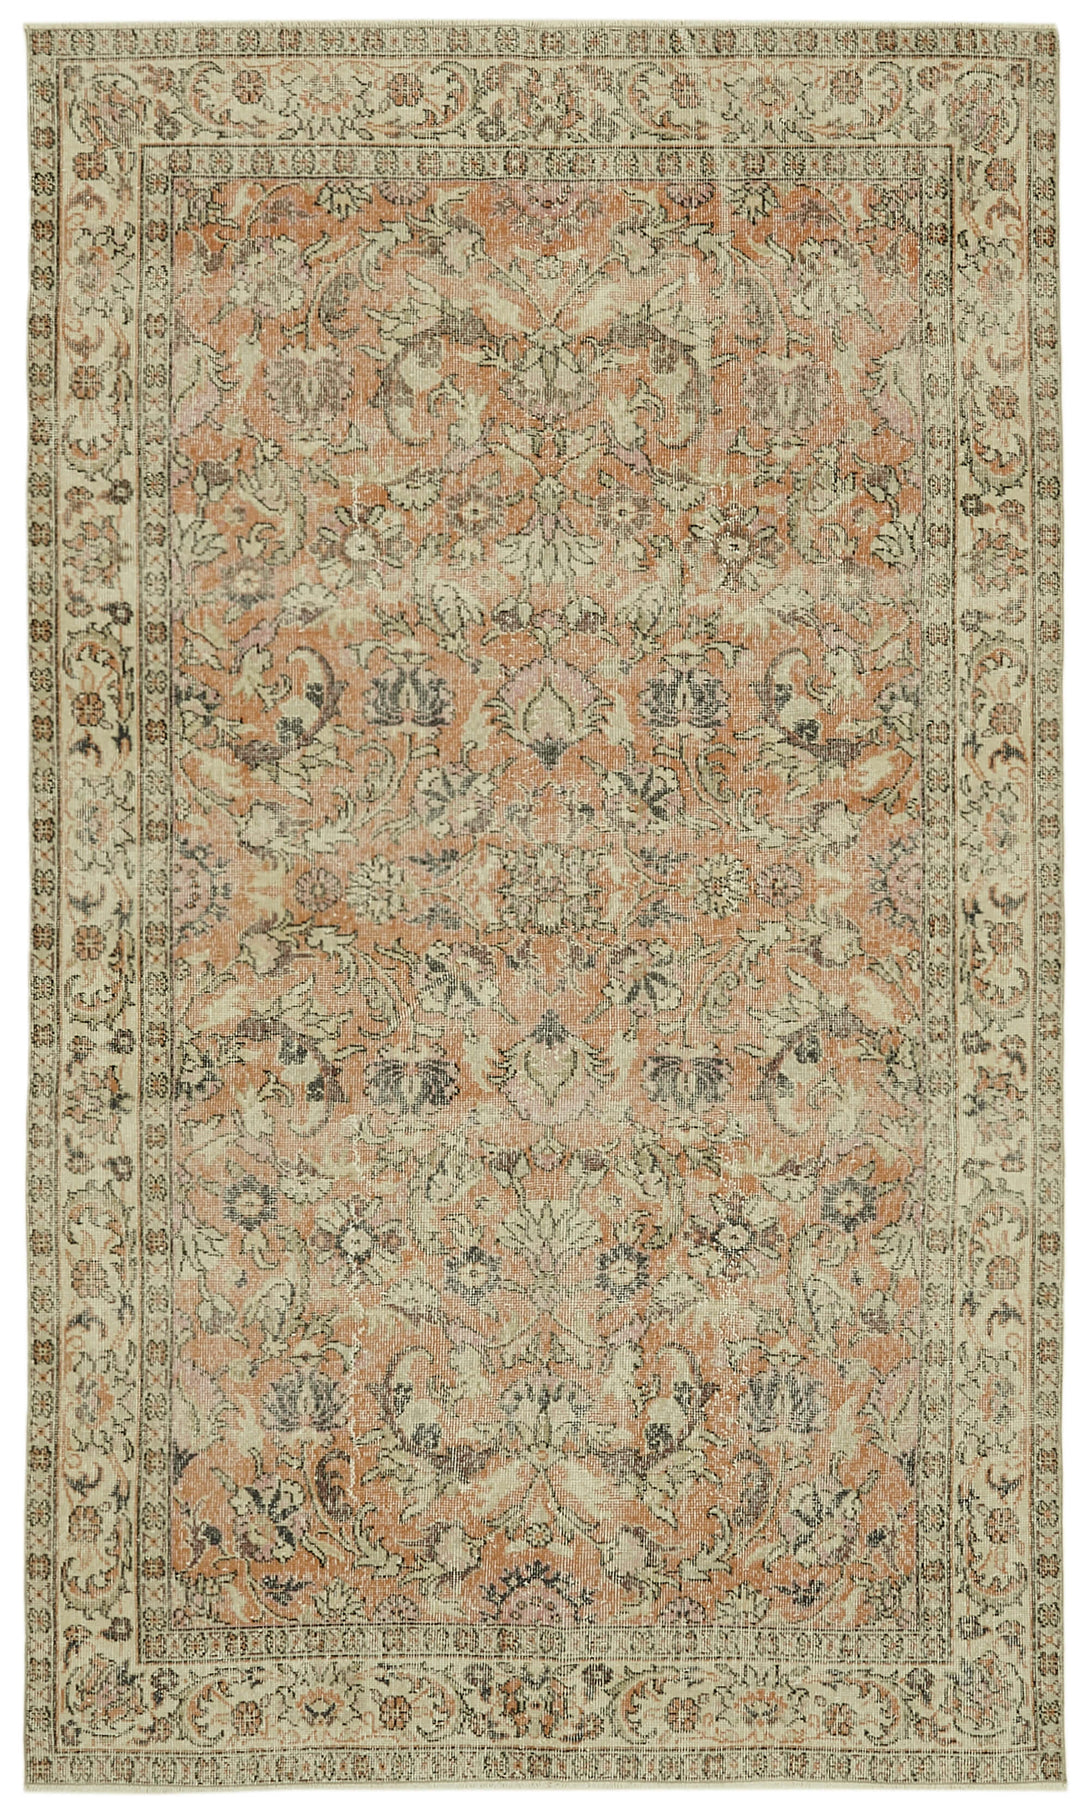 Handmade White Wash Area Rug > Design# OL-AC-41759 > Size: 6'-6" x 9'-2", Carpet Culture Rugs, Handmade Rugs, NYC Rugs, New Rugs, Shop Rugs, Rug Store, Outlet Rugs, SoHo Rugs, Rugs in USA